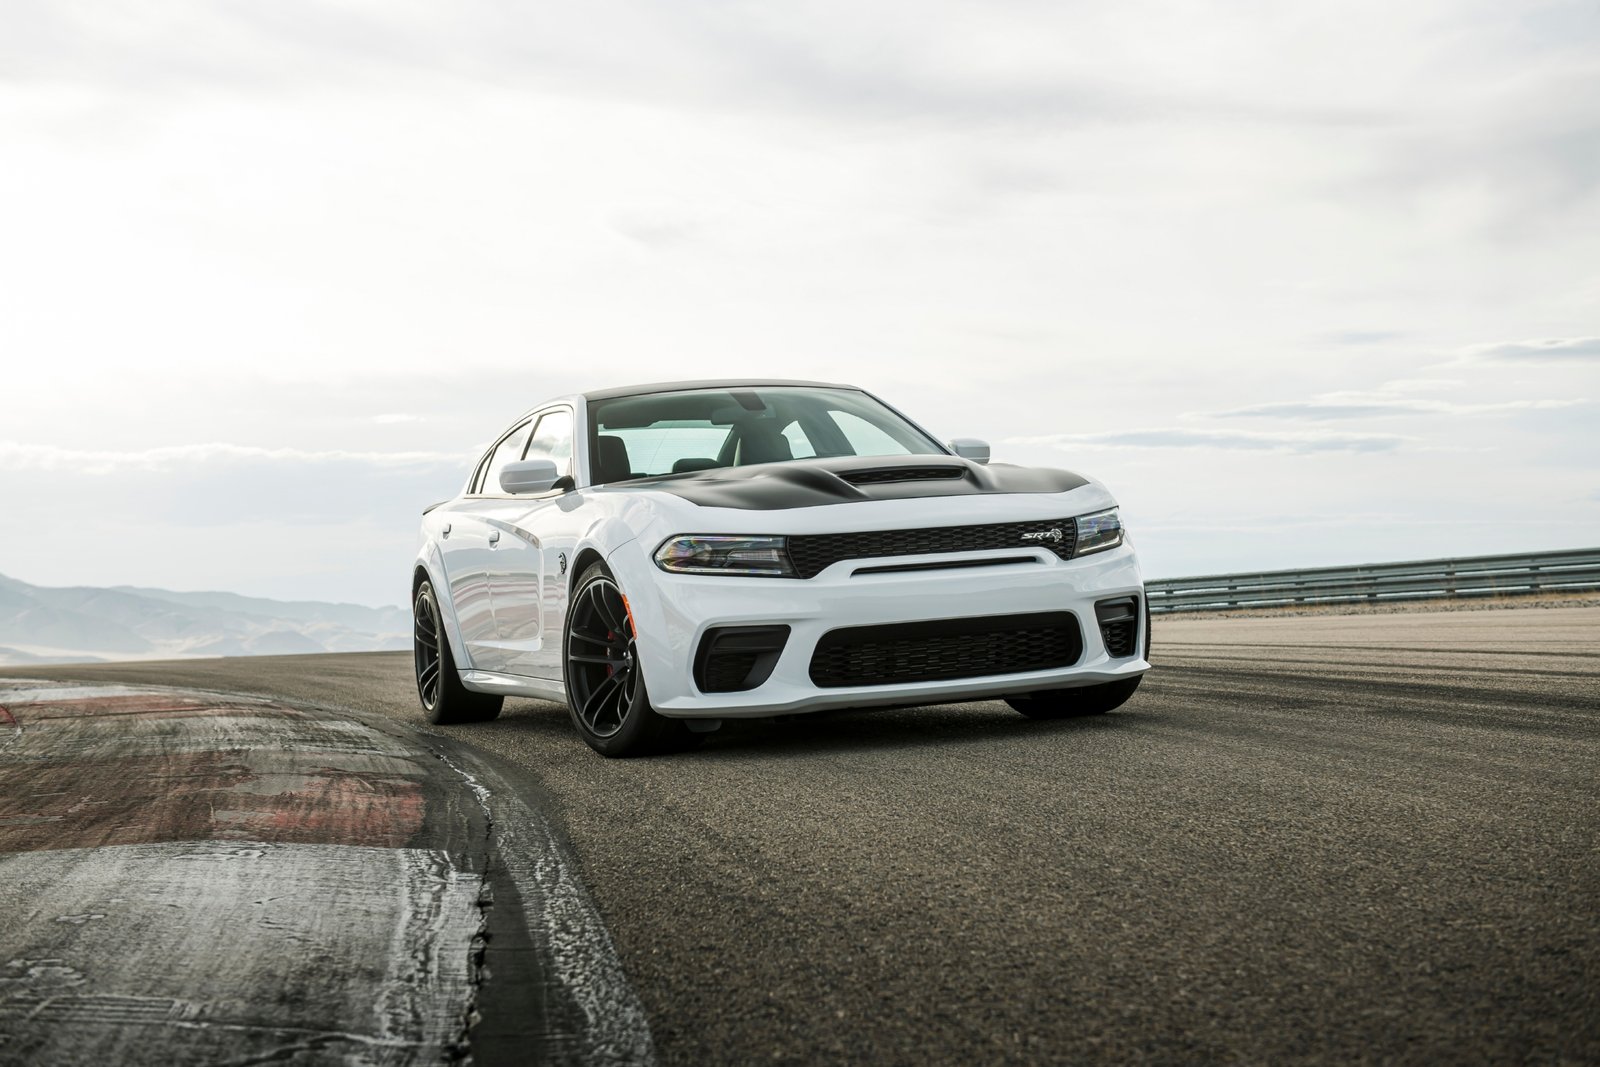 2023 Dodge Charger SRT Hellcat Redeye: With 797 horsepower the C